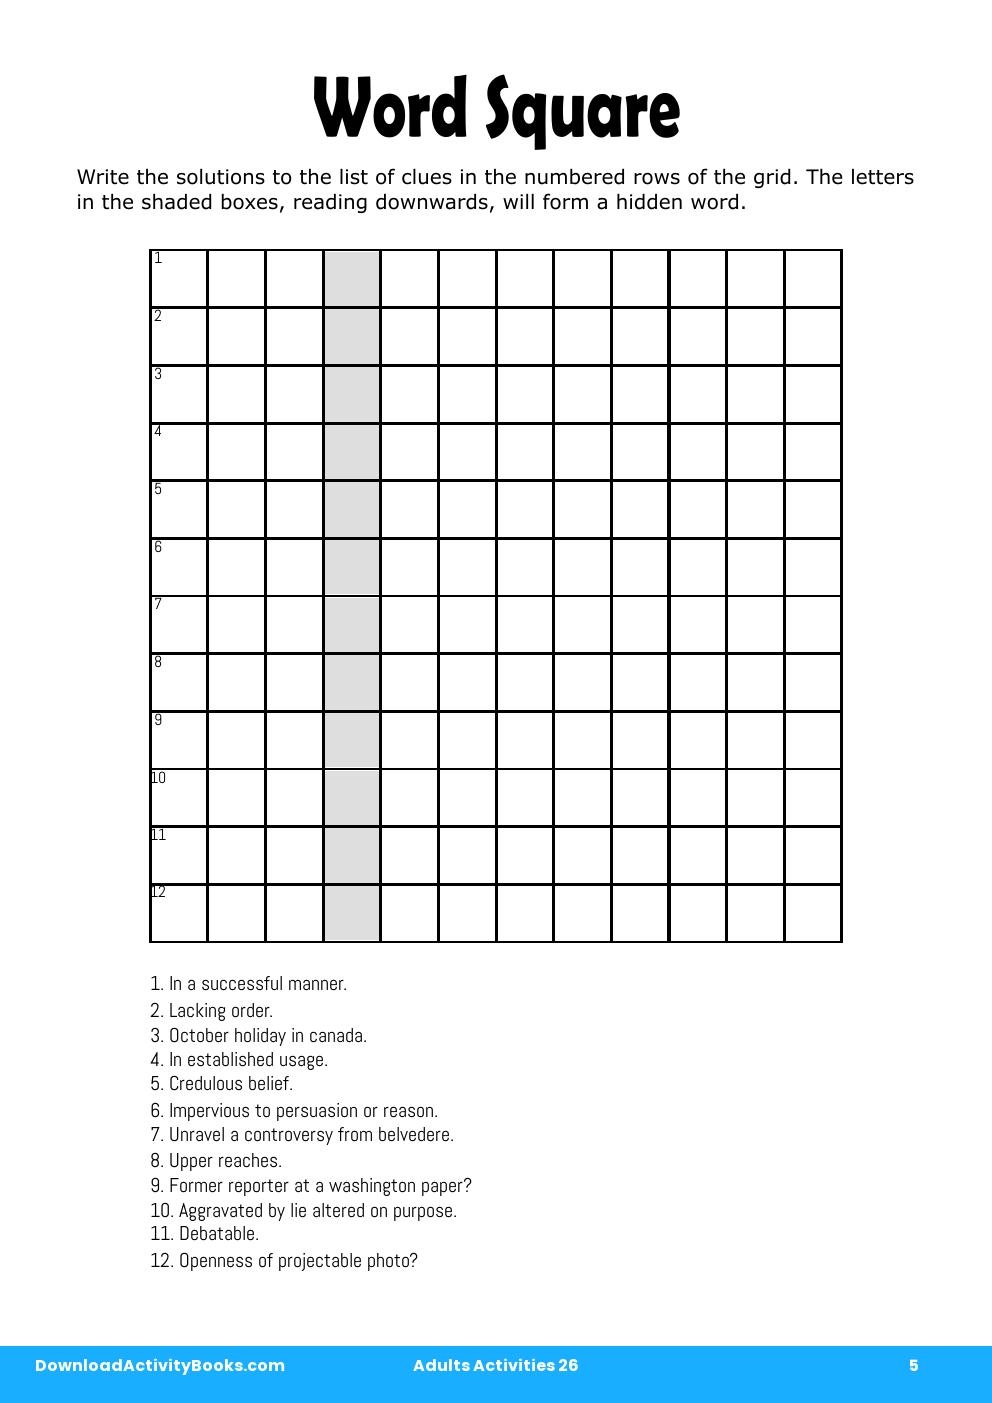 Word Square in Adults Activities 26